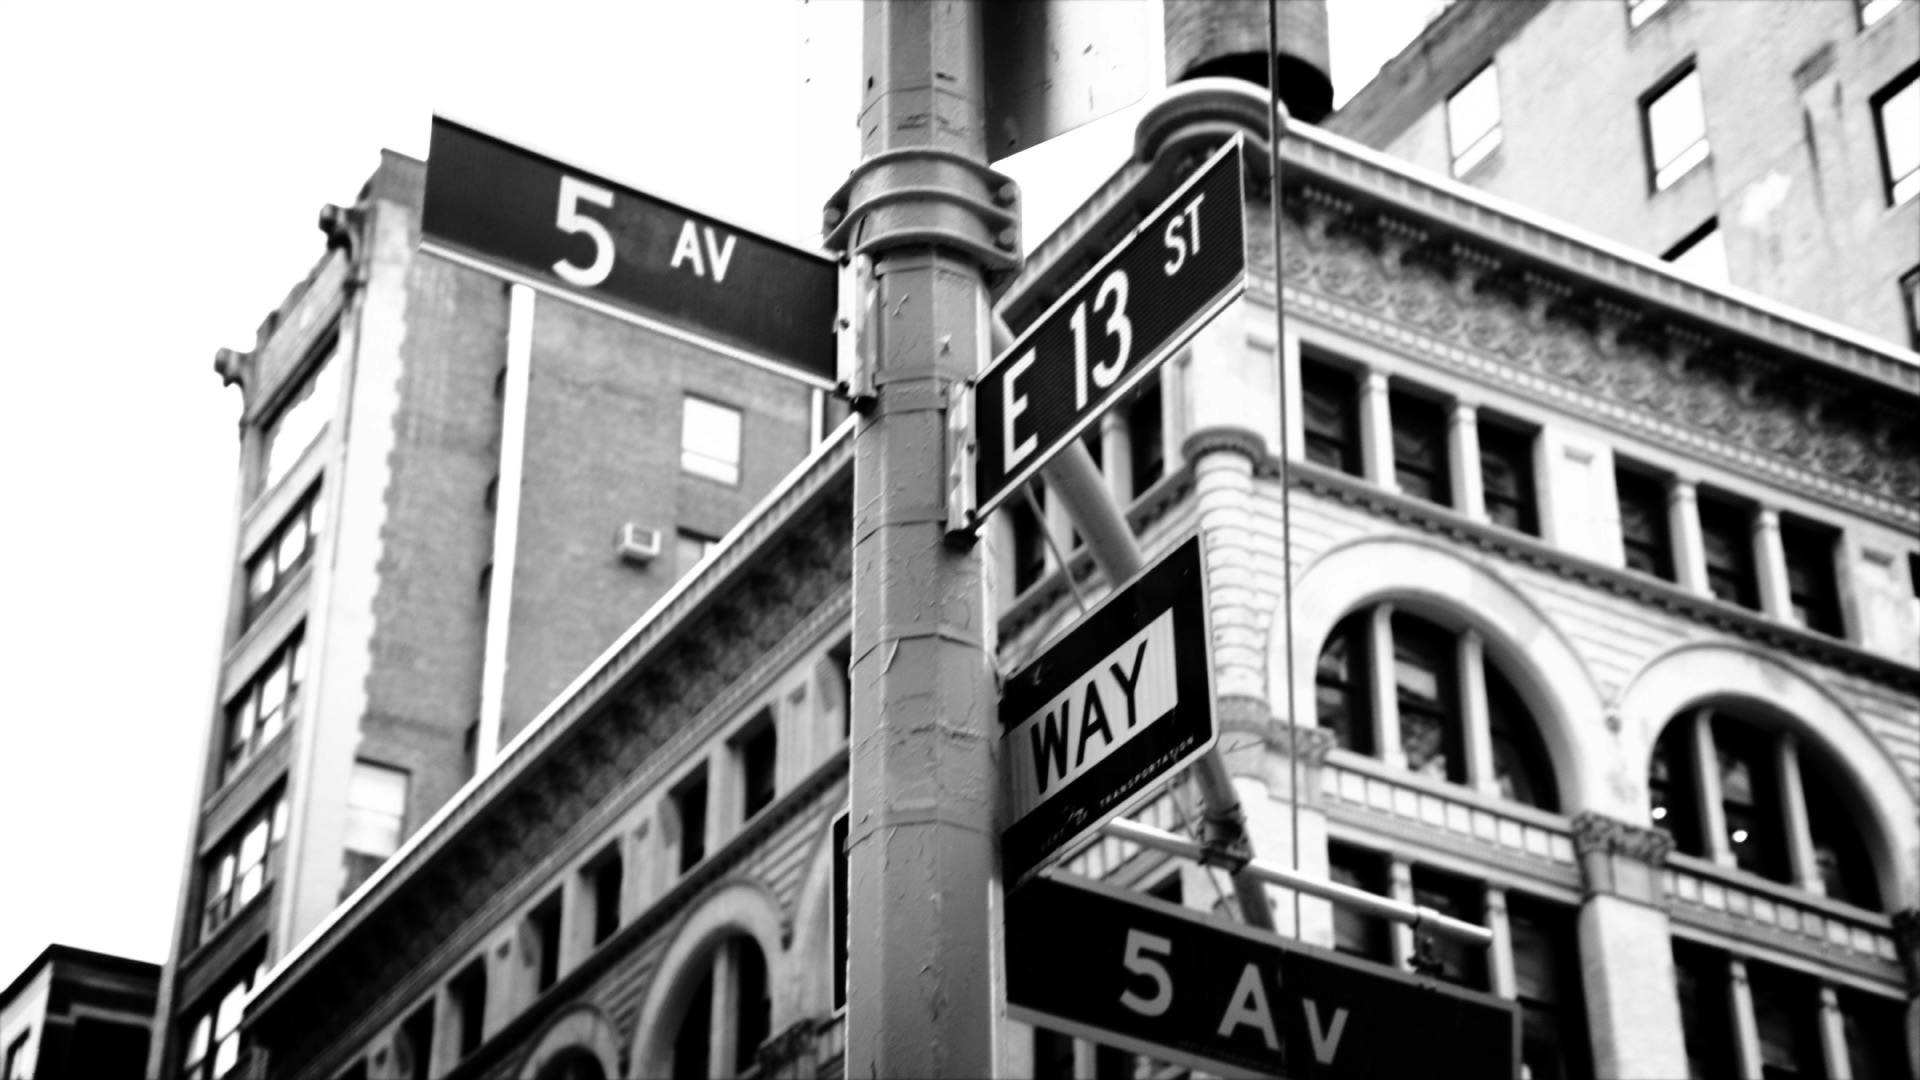 A black and white photo of the street signs at the intersection of Fifth Avenue and 13th Street.